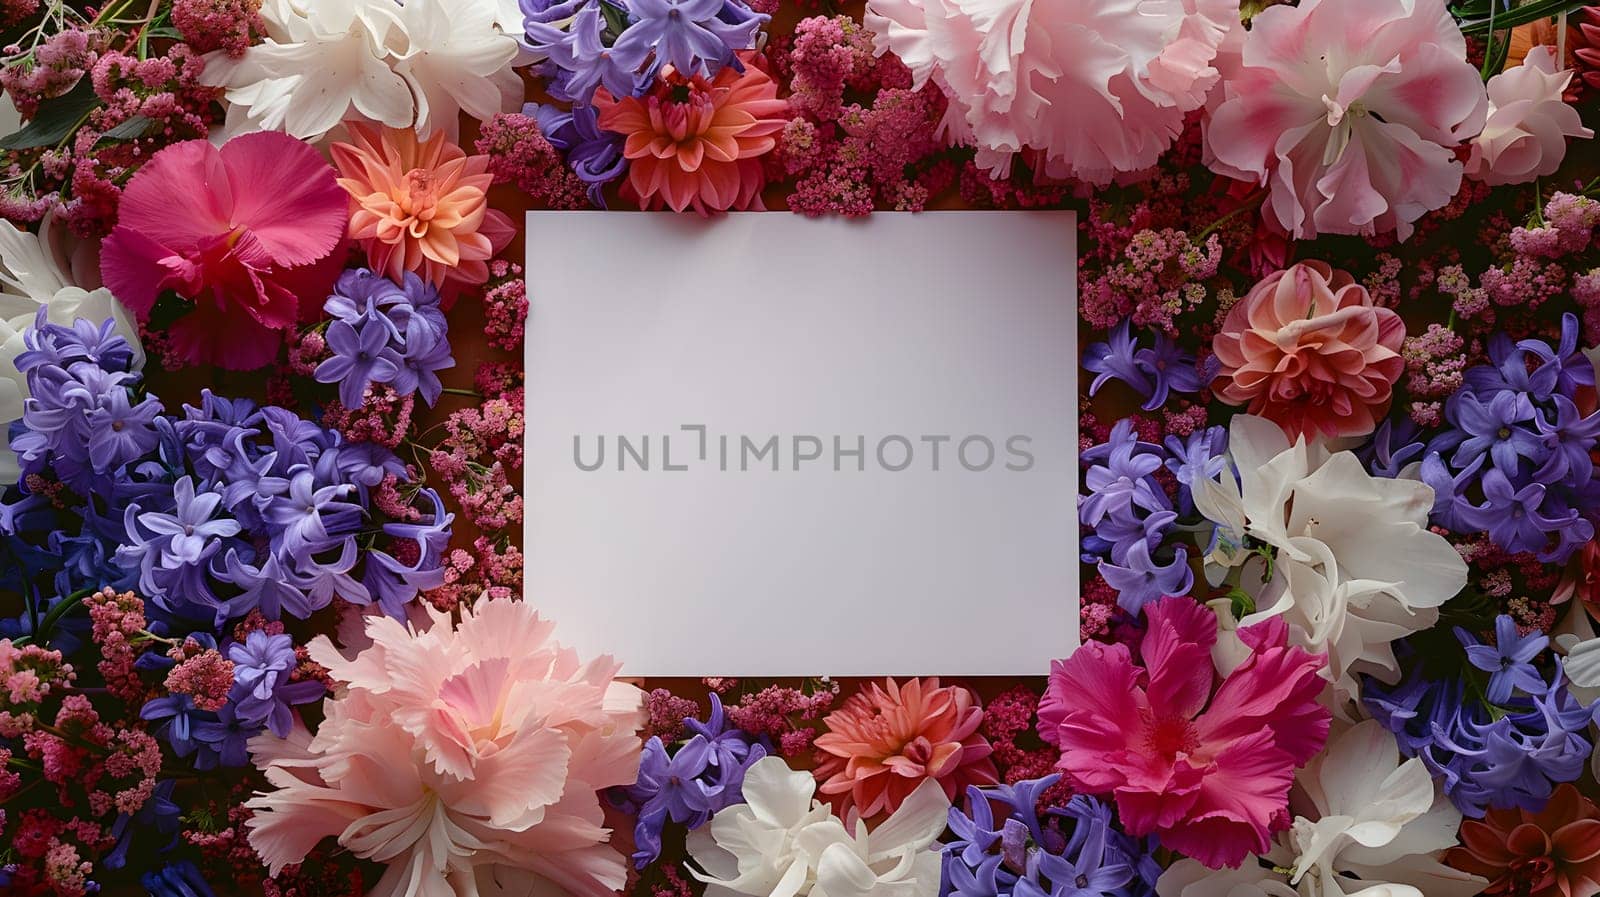 A white card is elegantly framed by a variety of colorful flowers in shades of blue, purple, pink, violet, and magenta, creating a beautiful display of creative arts and natures beauty